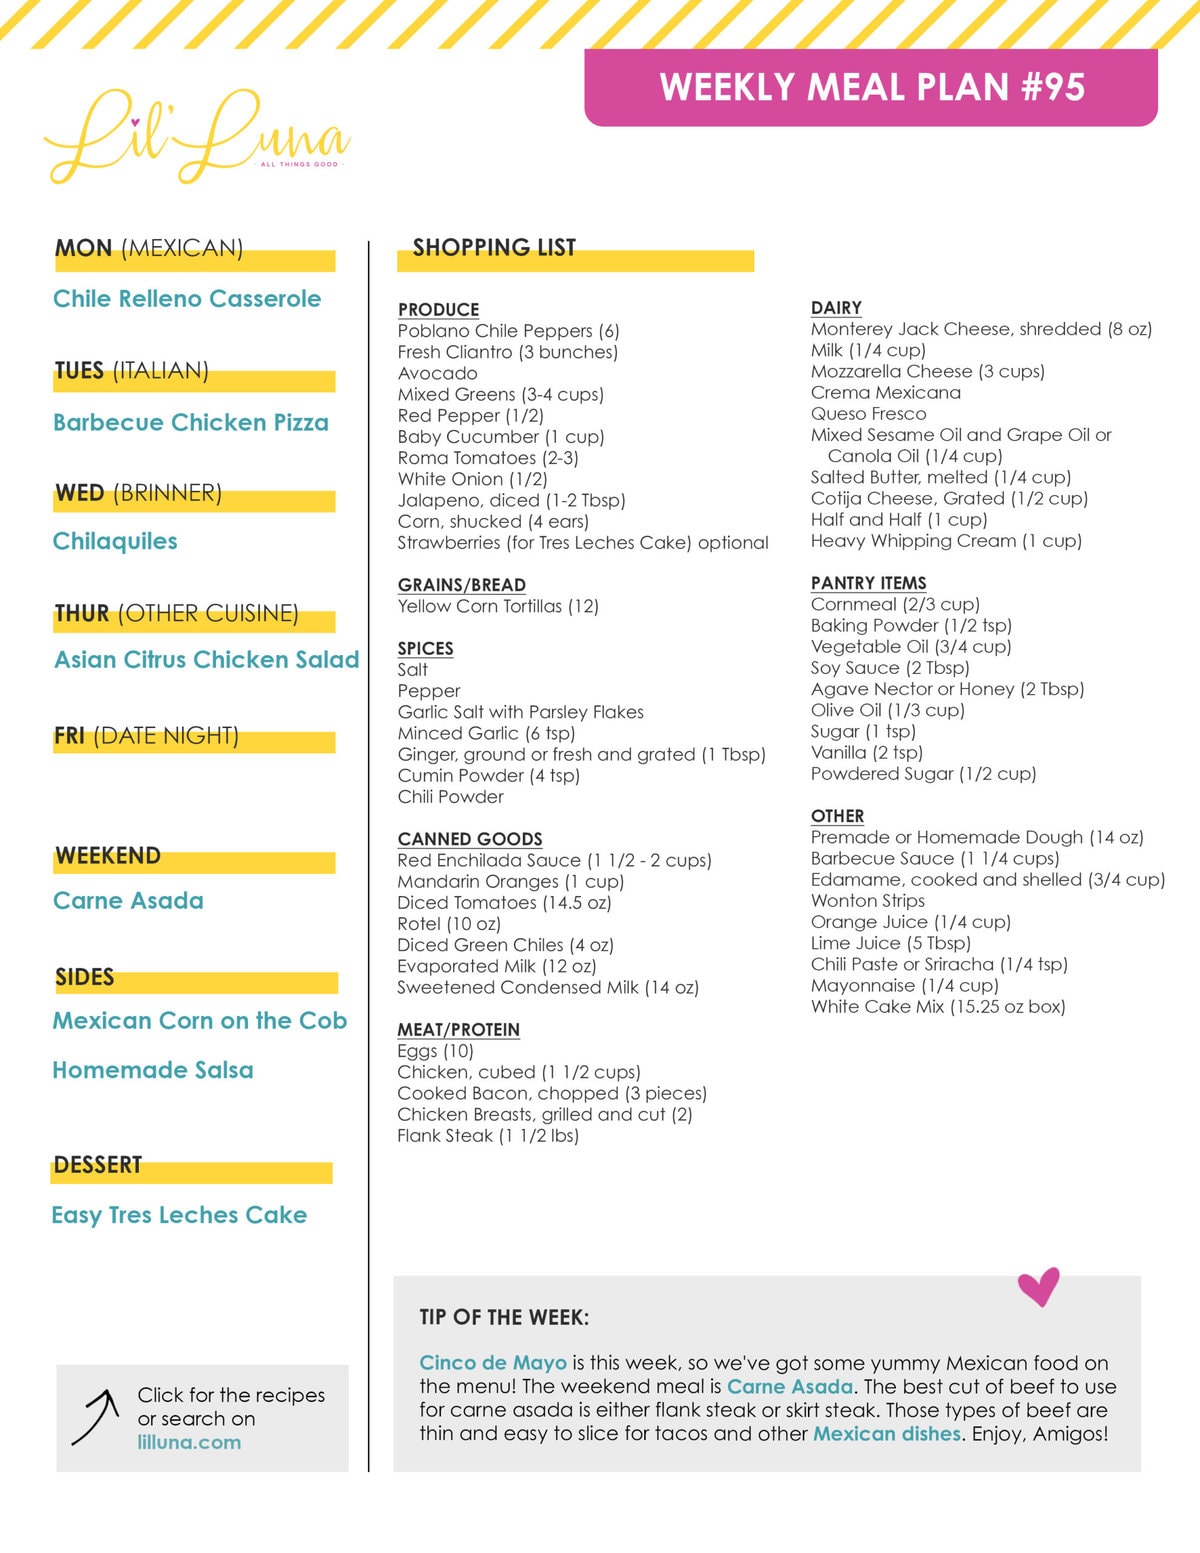 Printable version of Meal Plan #95 with grocery list.